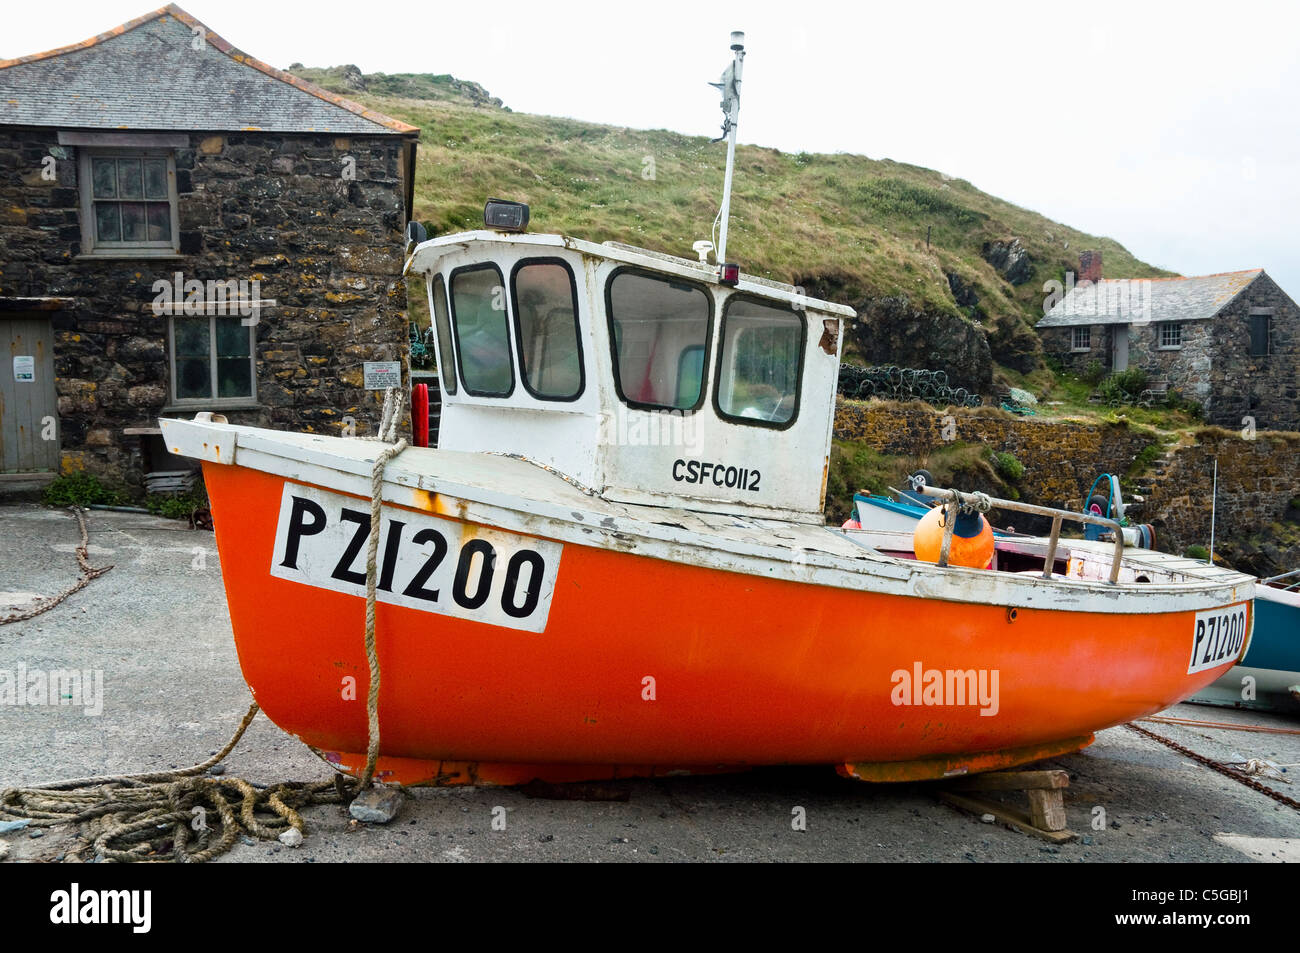 Bright orange fisherman's boat in the small traditional fishing harbour at Mullion Cove, Cornwall, UK. Stock Photo